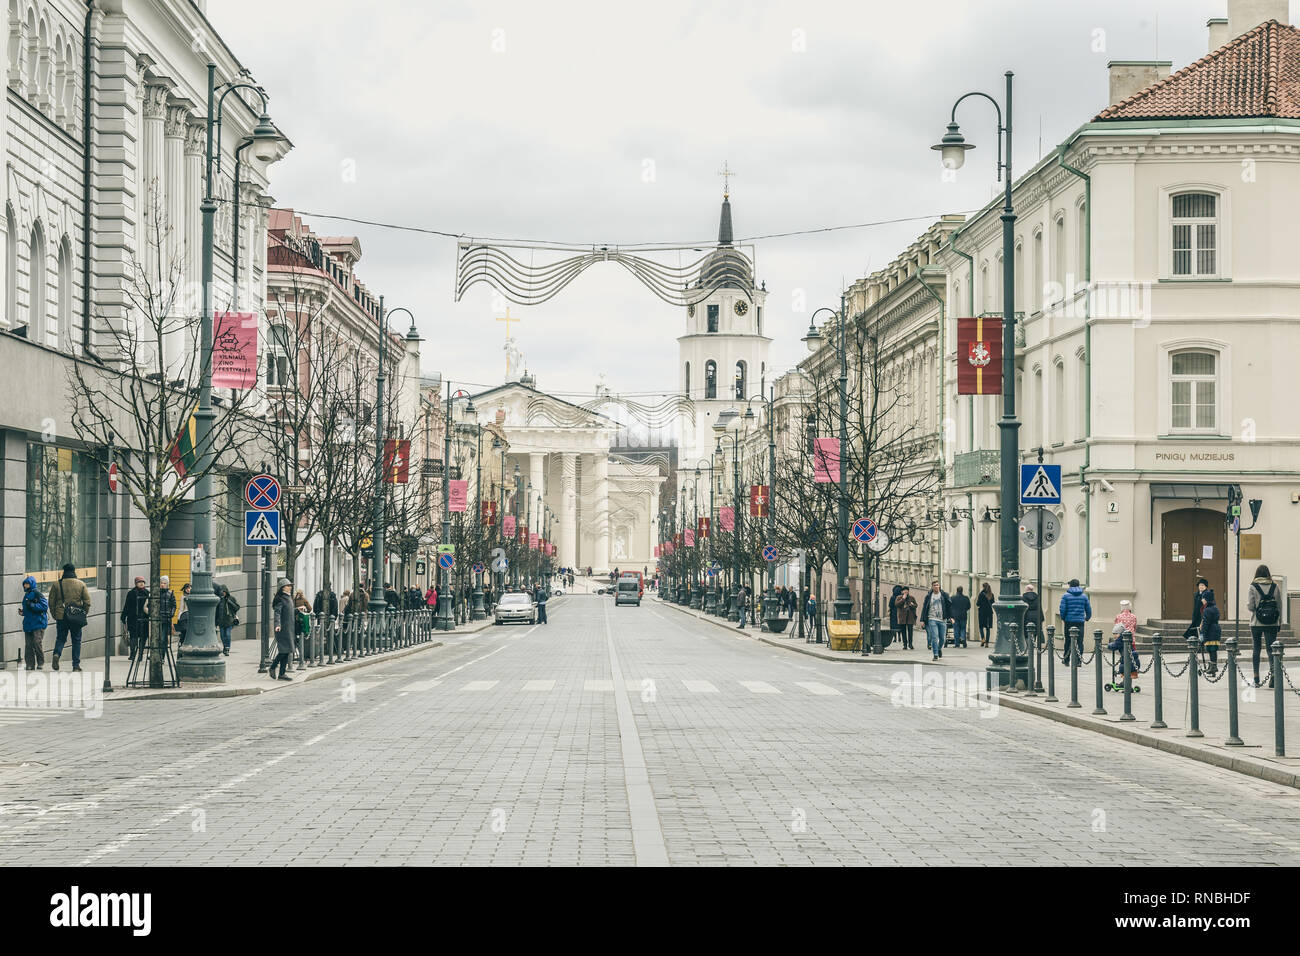 Vilnius, Lithuania - March, 11, 2017: Main shopping street to  Cathedral square with bell tower in  Vilnius, Lithuania Stock Photo